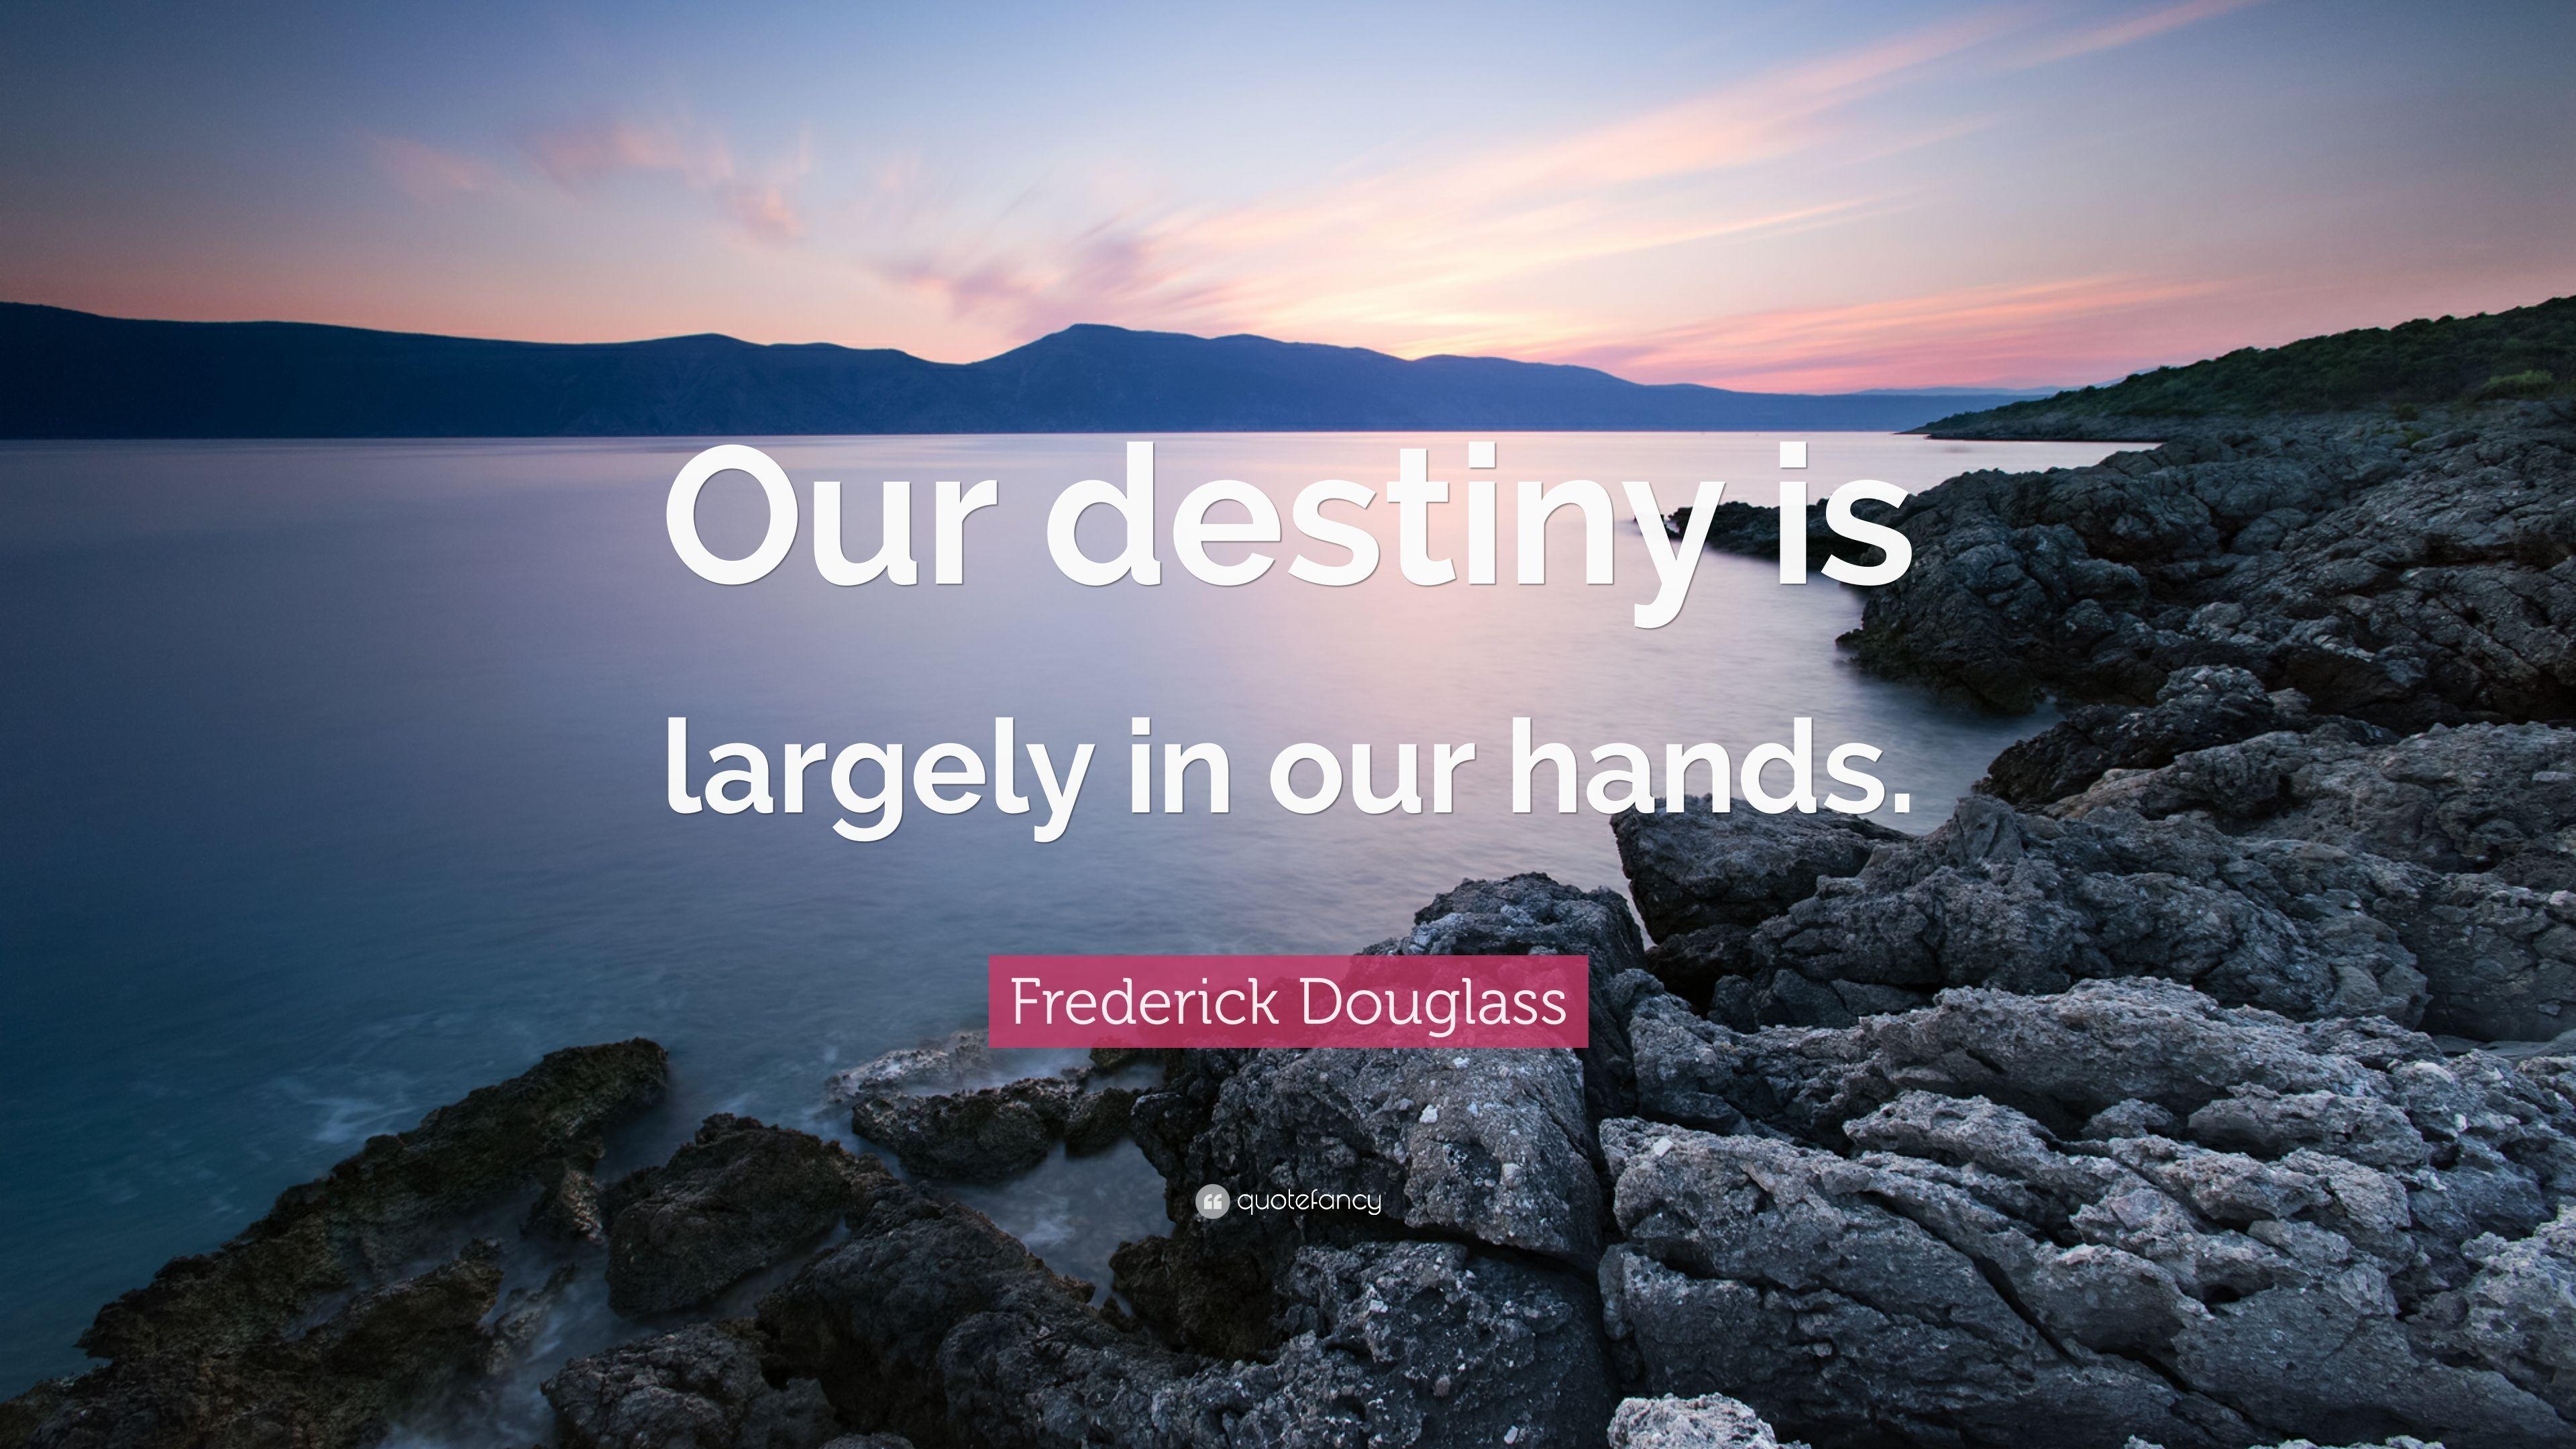 Frederick Douglass Quote: “Our destiny is largely in our hands